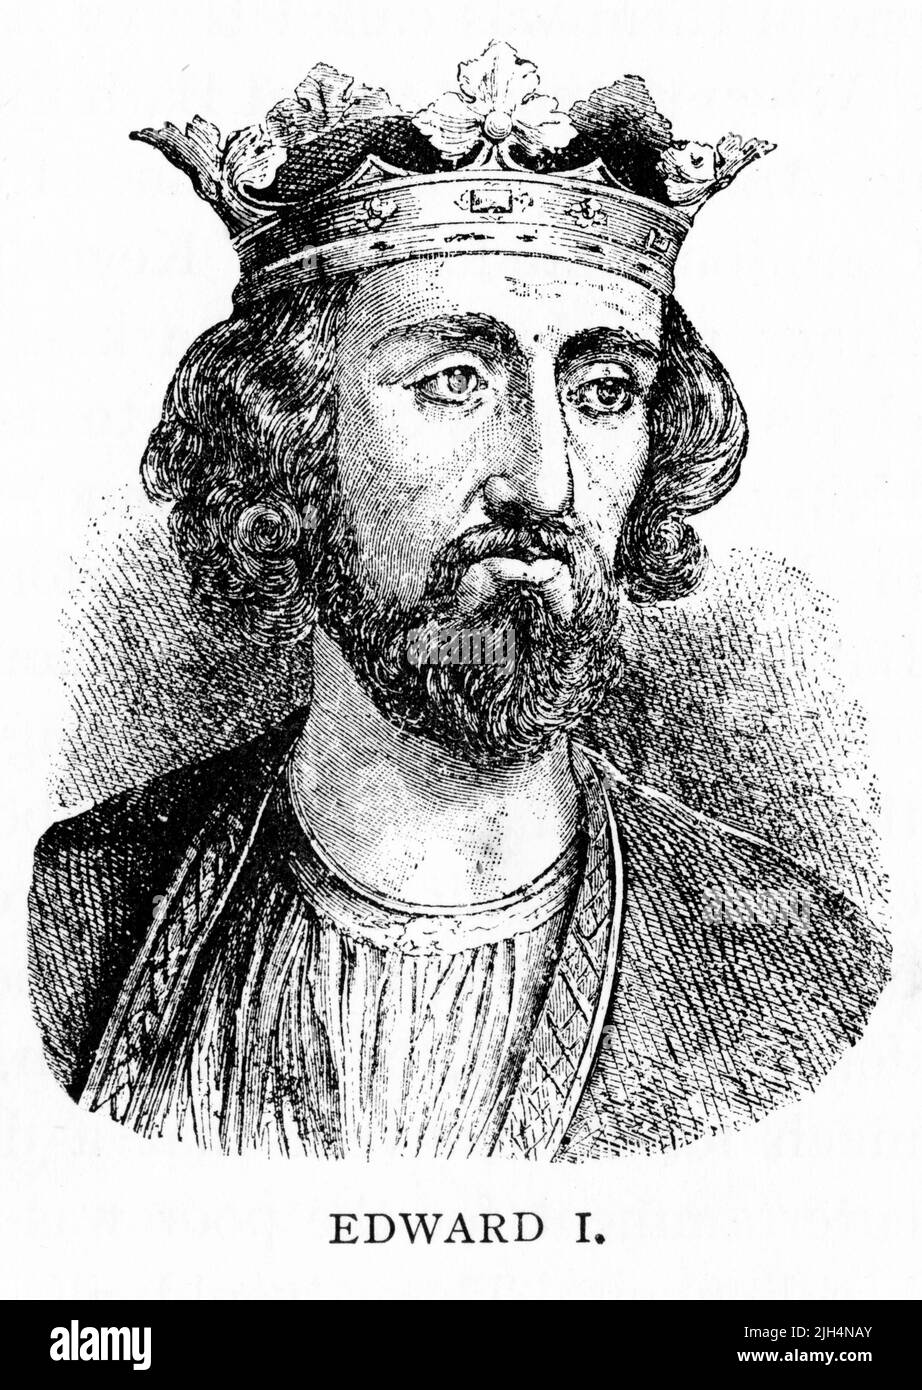 Engraved portrait of Edward I (1239 – 1307), also known as Edward Longshanks and the Hammer of the Scots. King of England from 1272 to 1307. Stock Photo